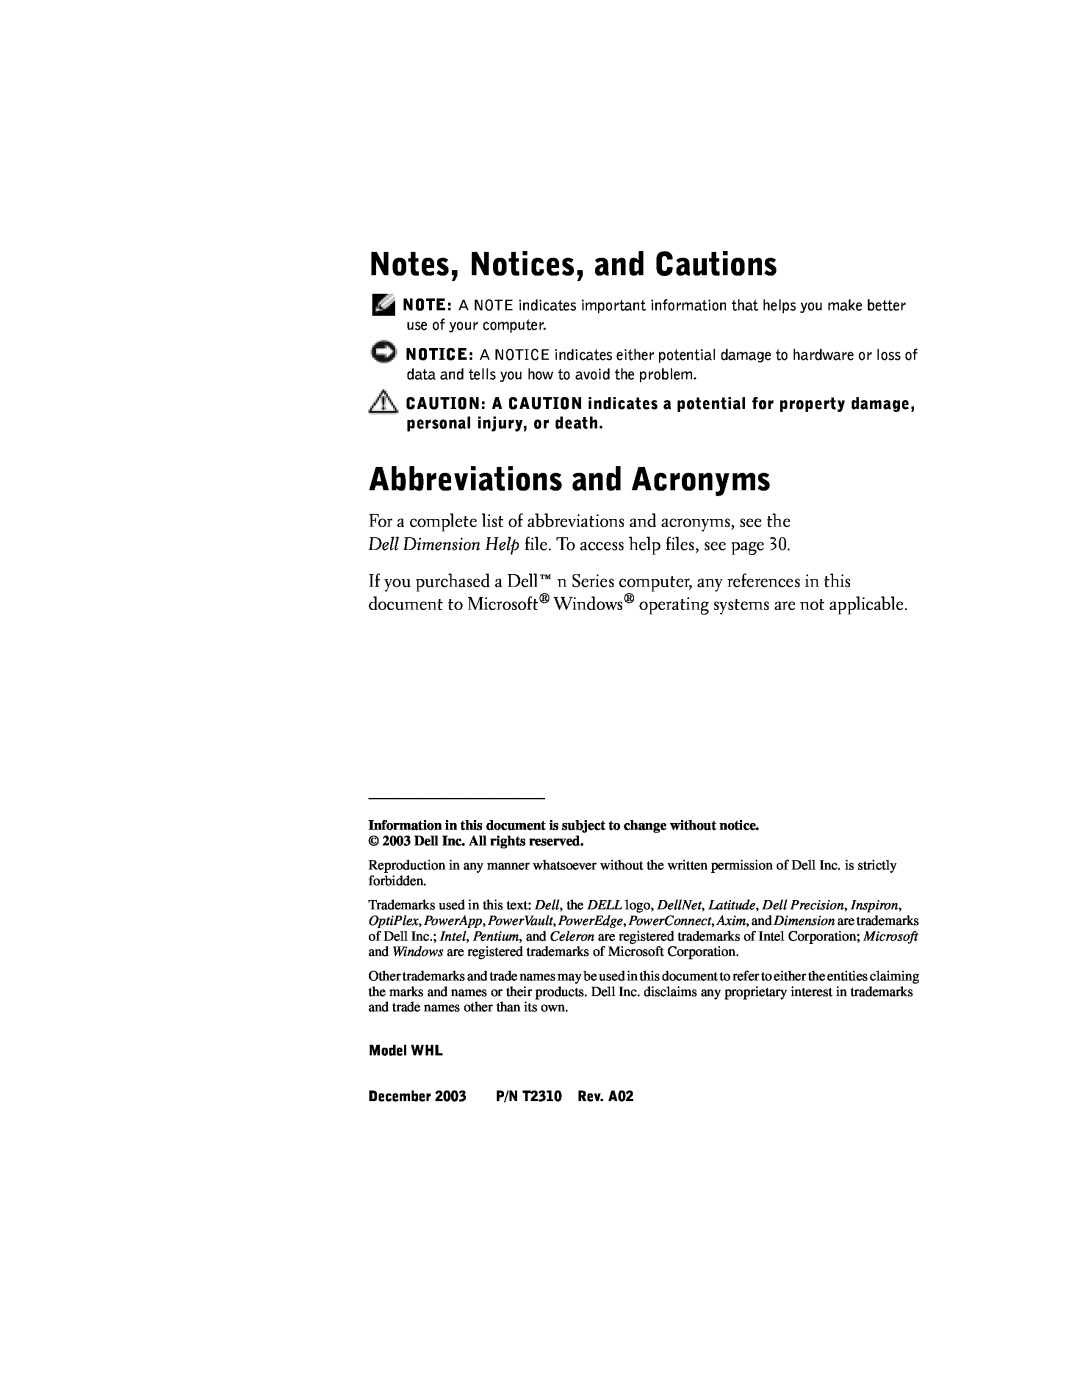 Dell XPS manual Notes, Notices, and Cautions, Abbreviations and Acronyms, Model WHL, December, P/N T2310 Rev. A02 